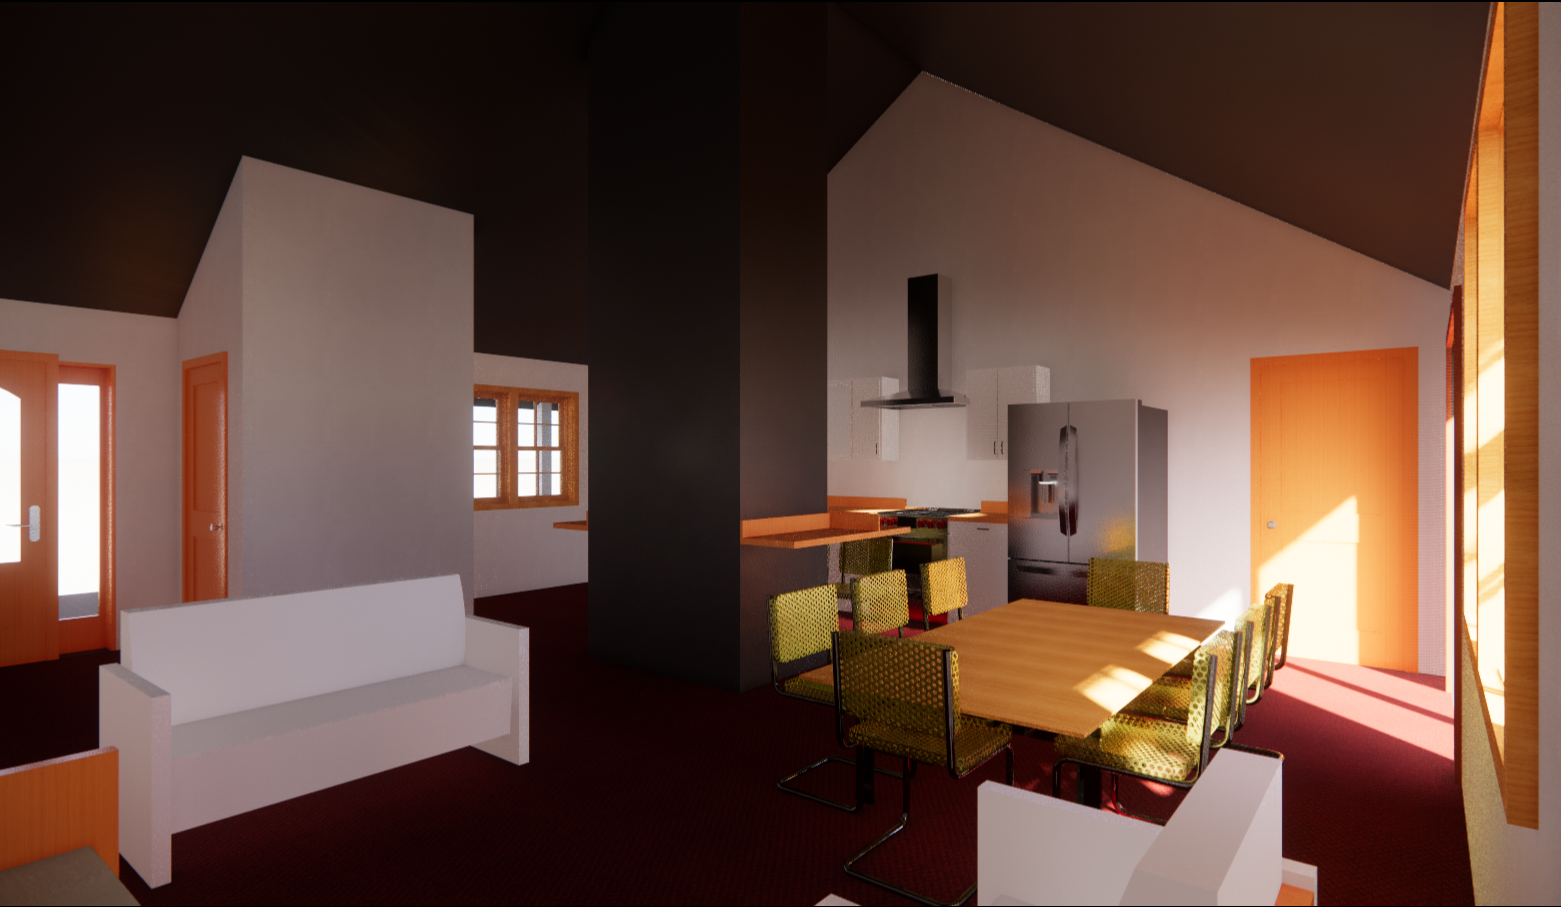 Rendered image of dining room and kitchen